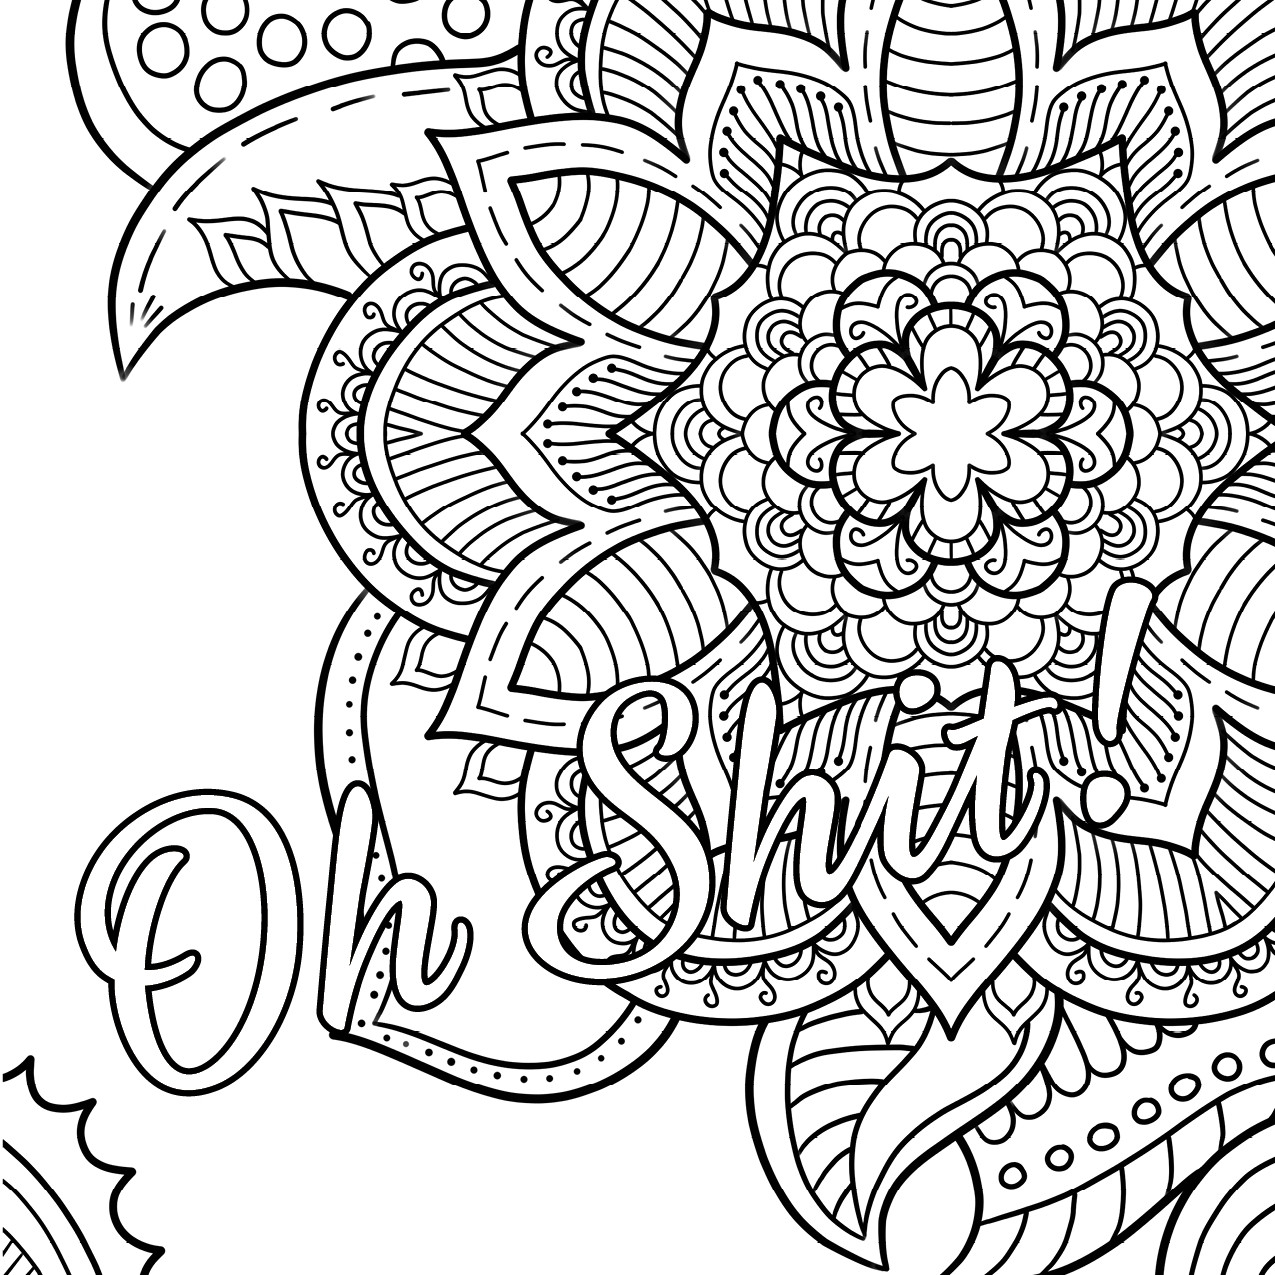 Swear Word Coloring Pages Printable Free
 Free Printable Swear Word Coloring Pages Download